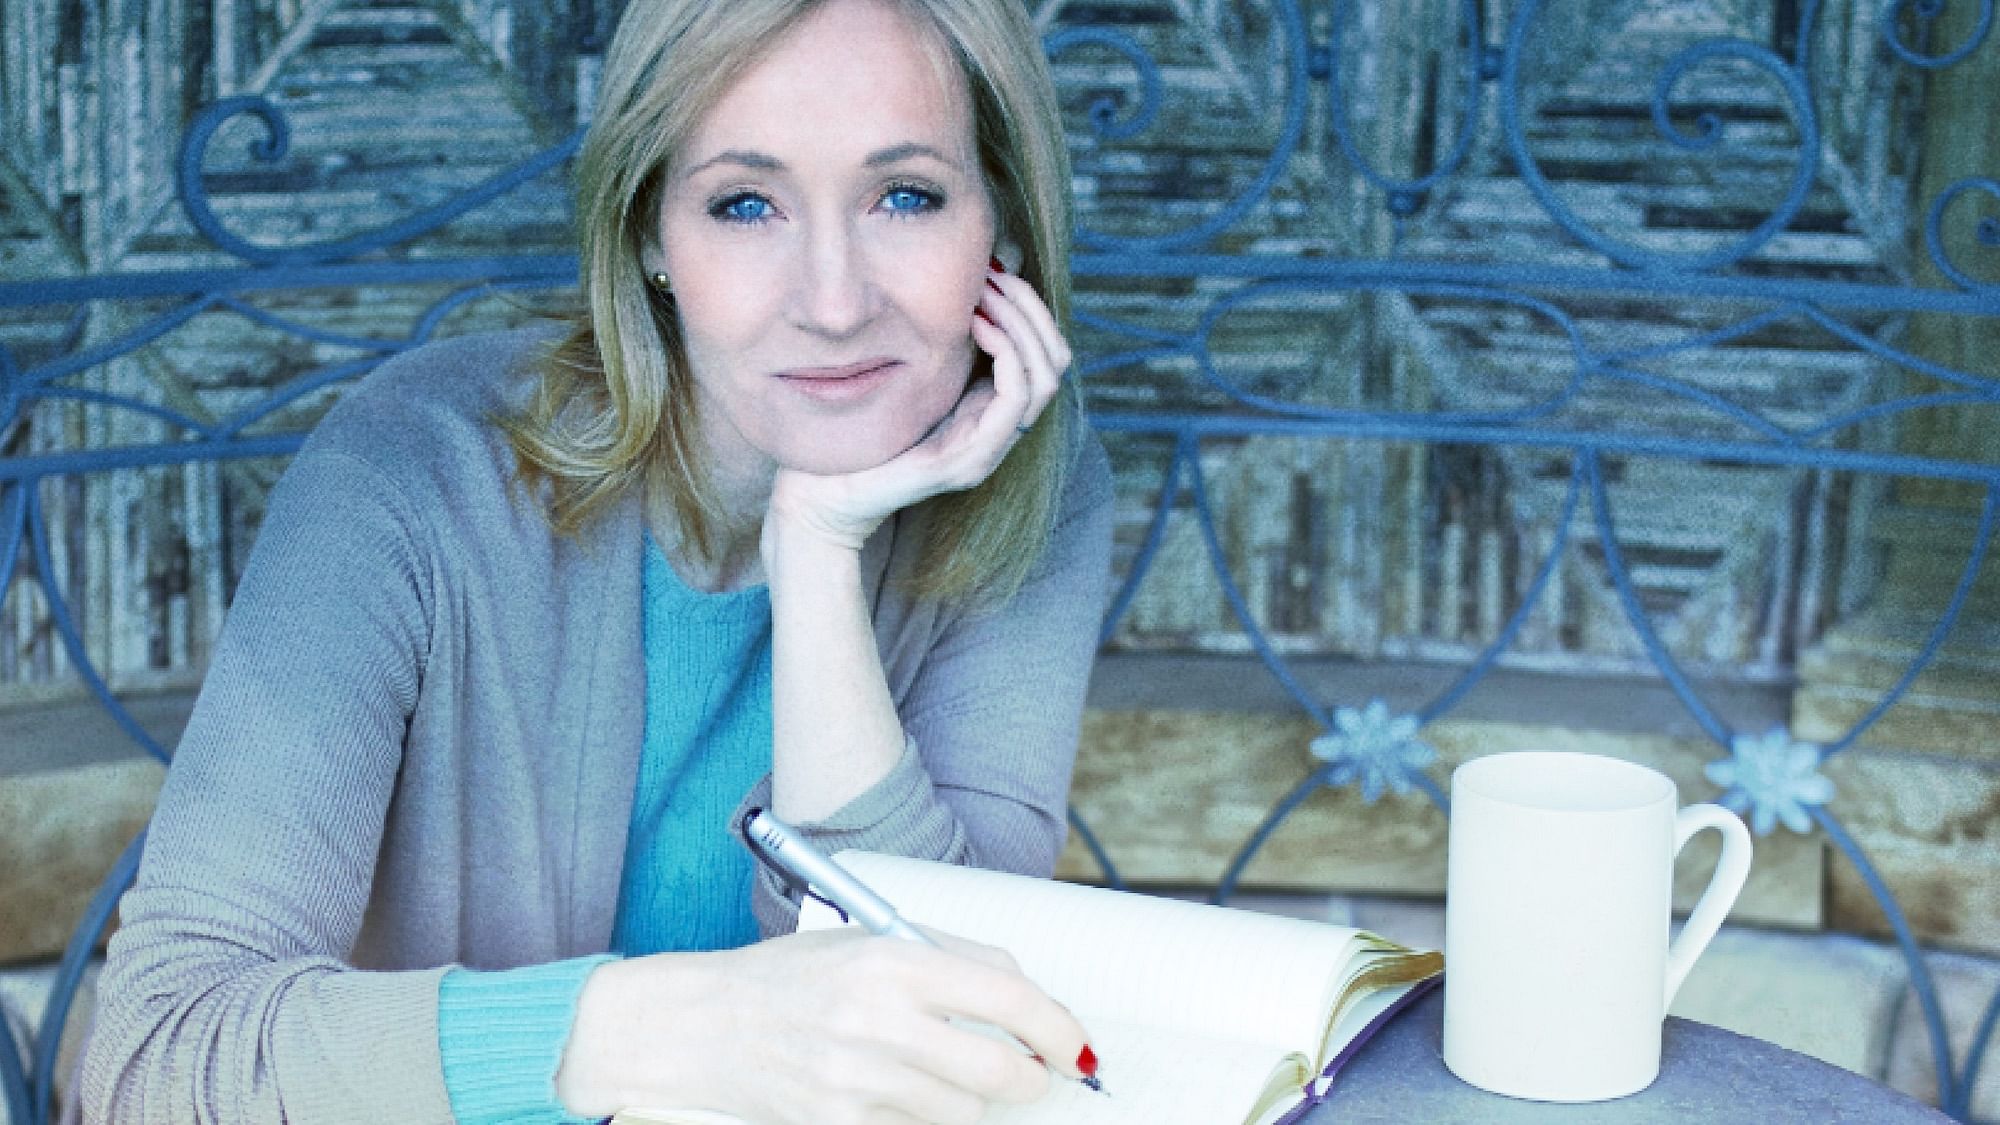 Author JK Rowling has opened up about being a sexual assault survivor.